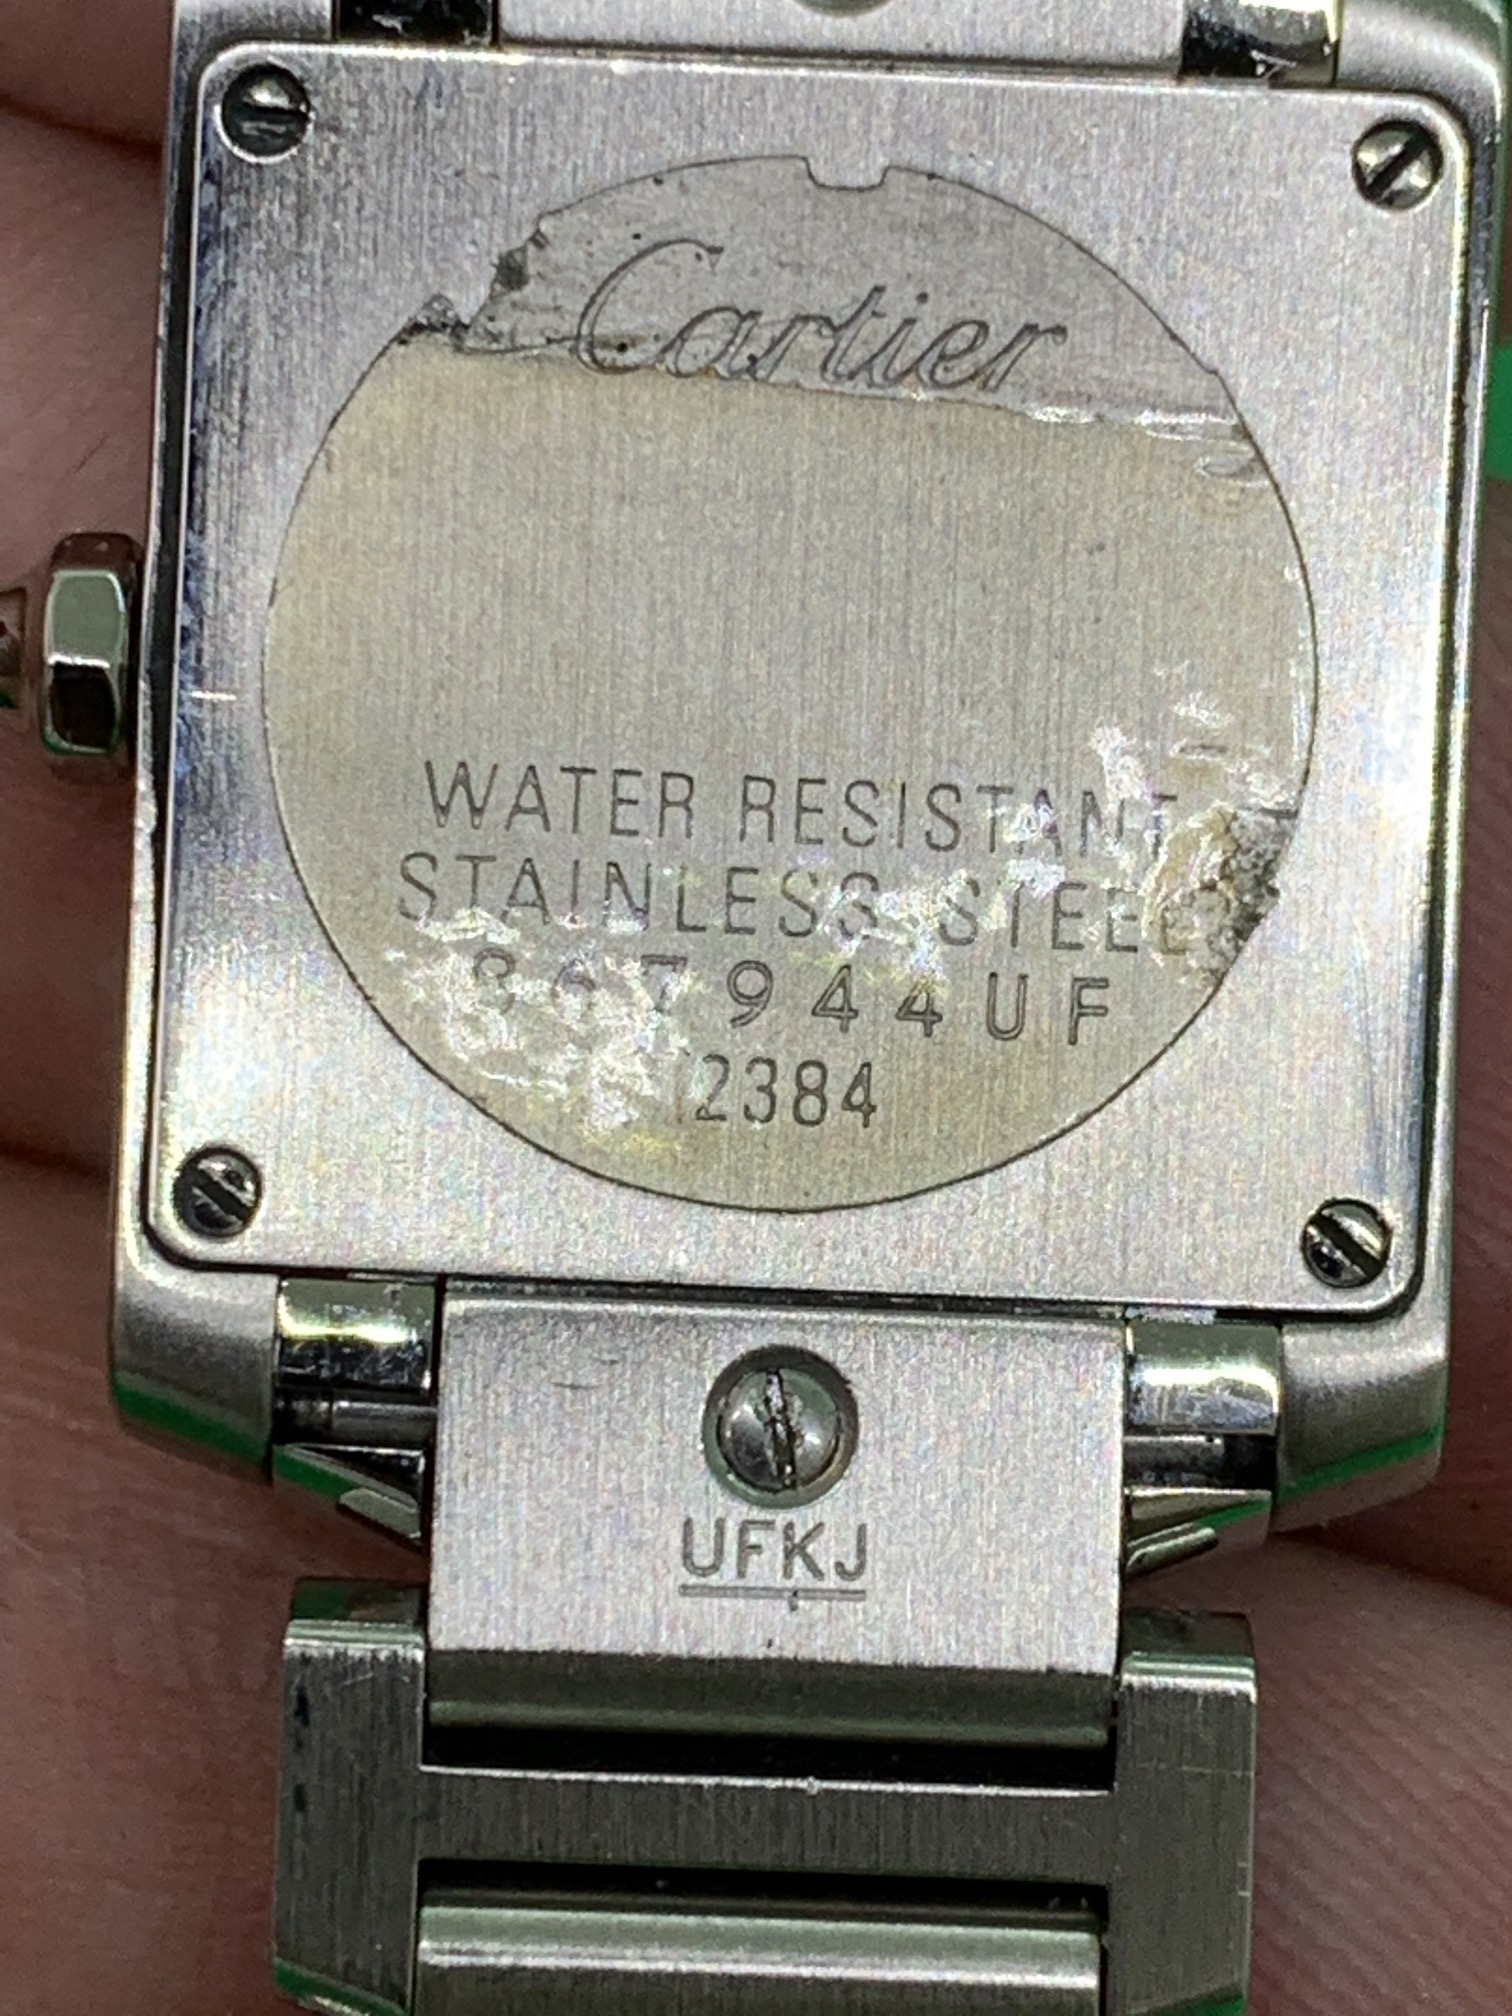 CARTIER STAINLESS STEEL WATCH - Image 5 of 5